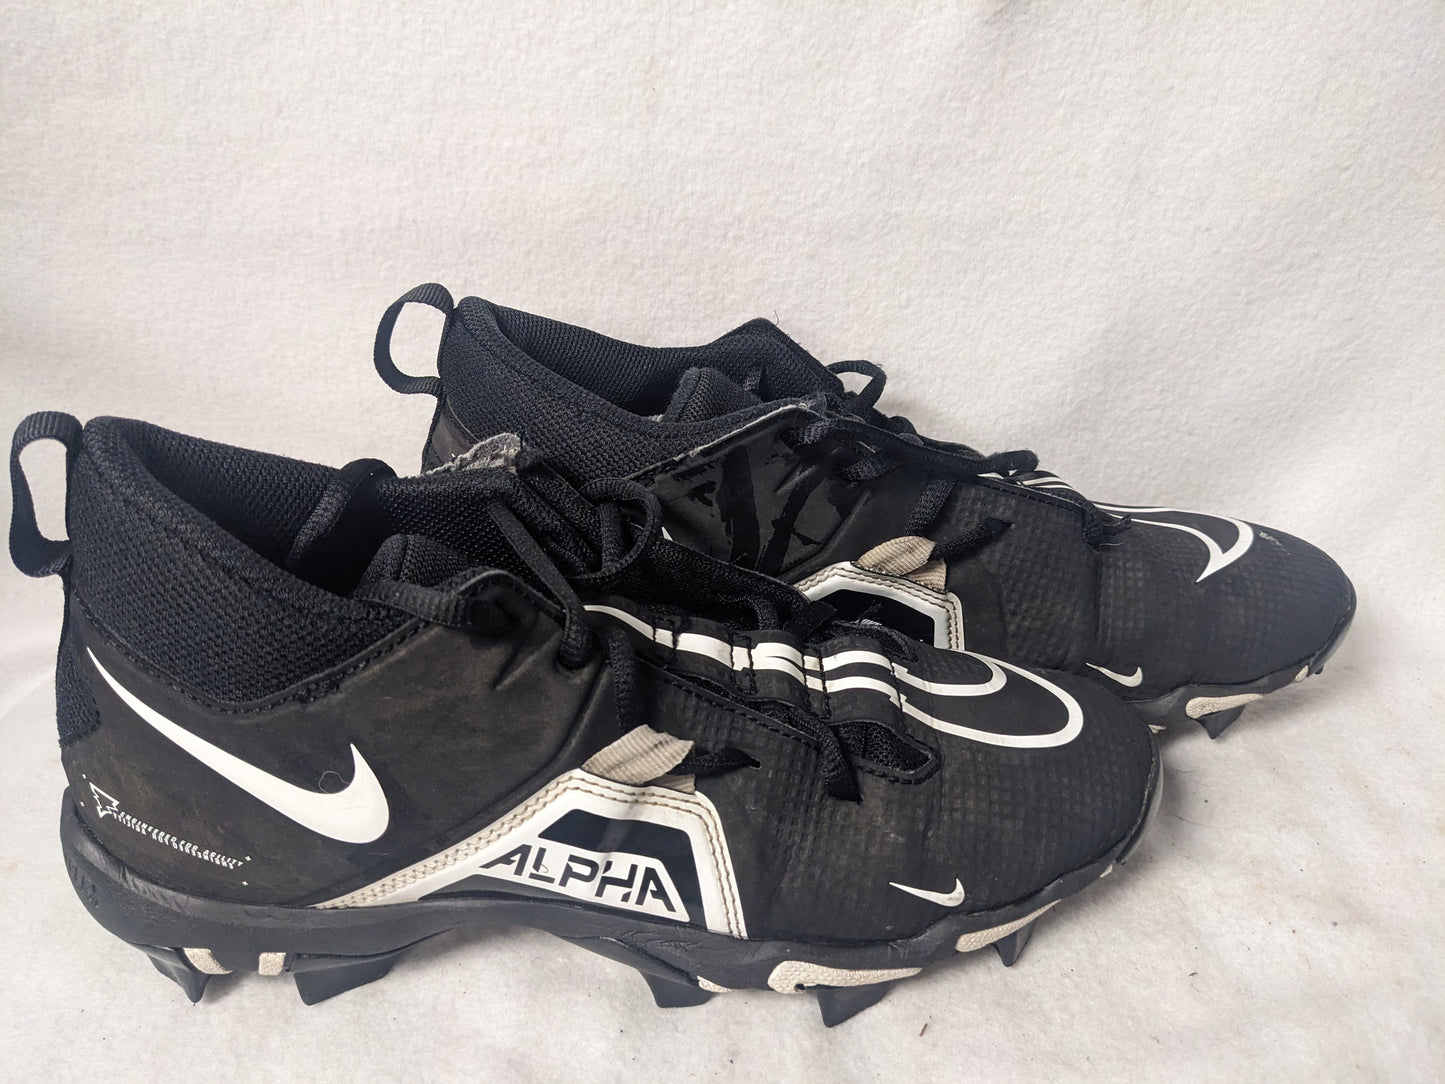 Nike Alpha Fastflex Cleats Size 9 Color Black Condition Used